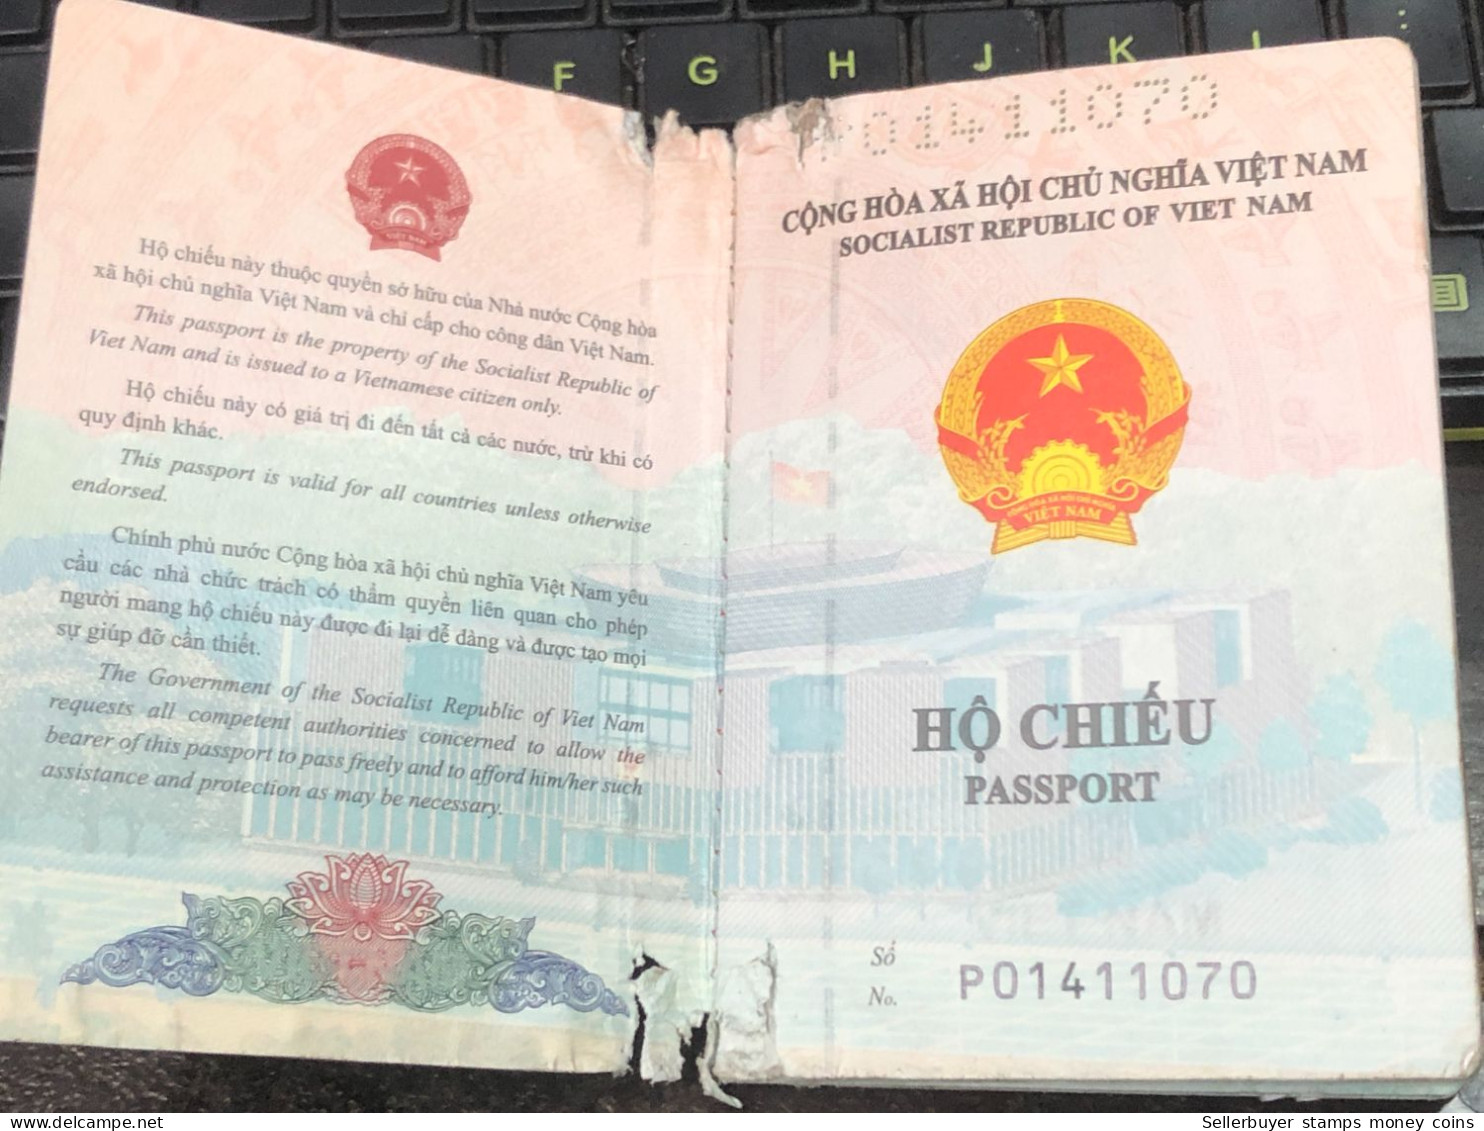 VIET NAMESE-OLD-ID PASSPORT VIET NAM-name-thanh Canh-2004-1pcs Book - Colecciones